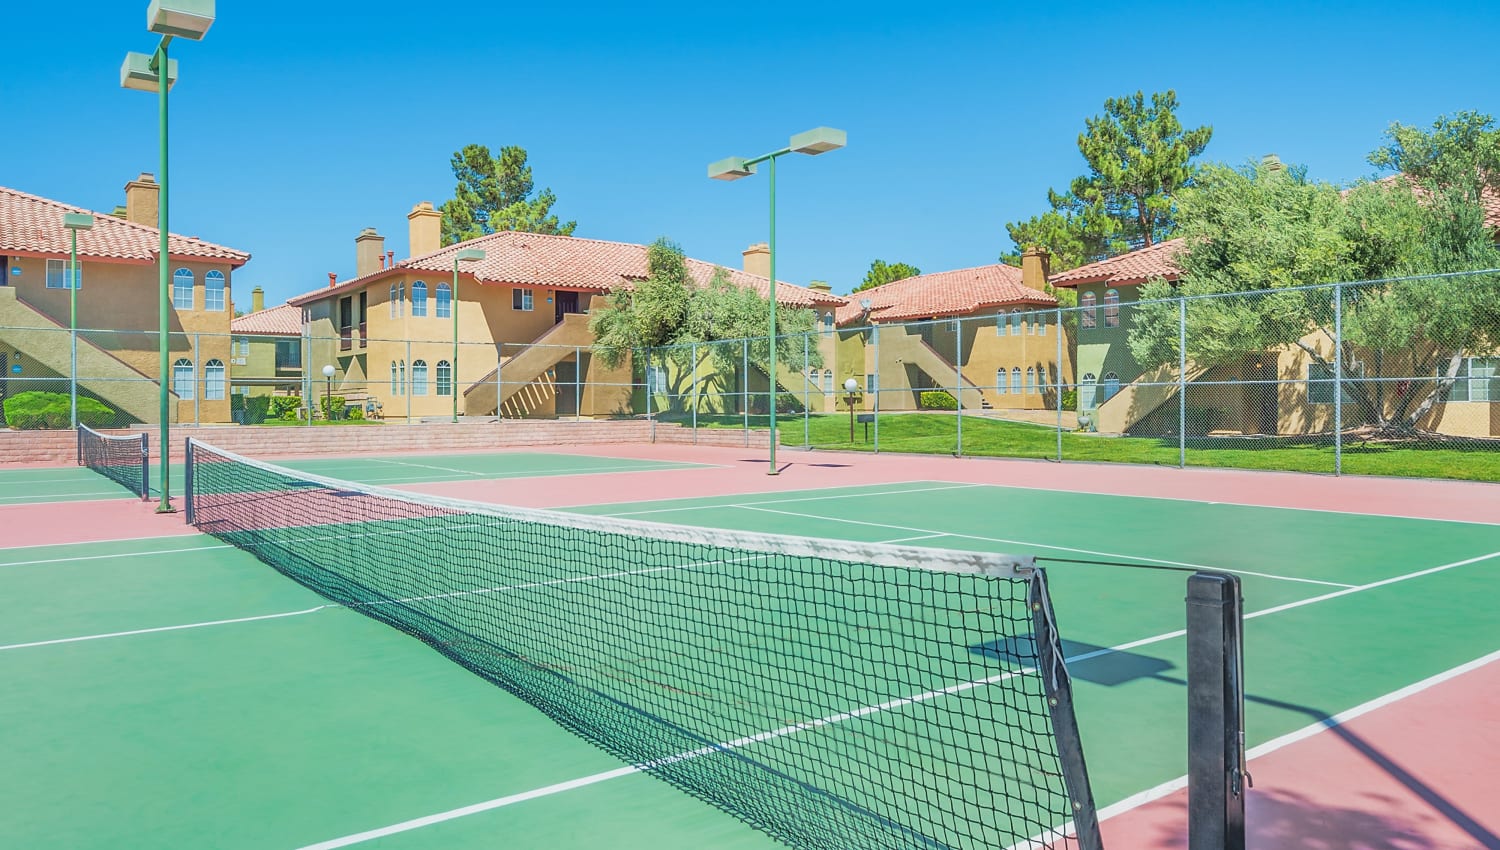 Tennis courts at Breakers Apartments in Las Vegas, Nevada